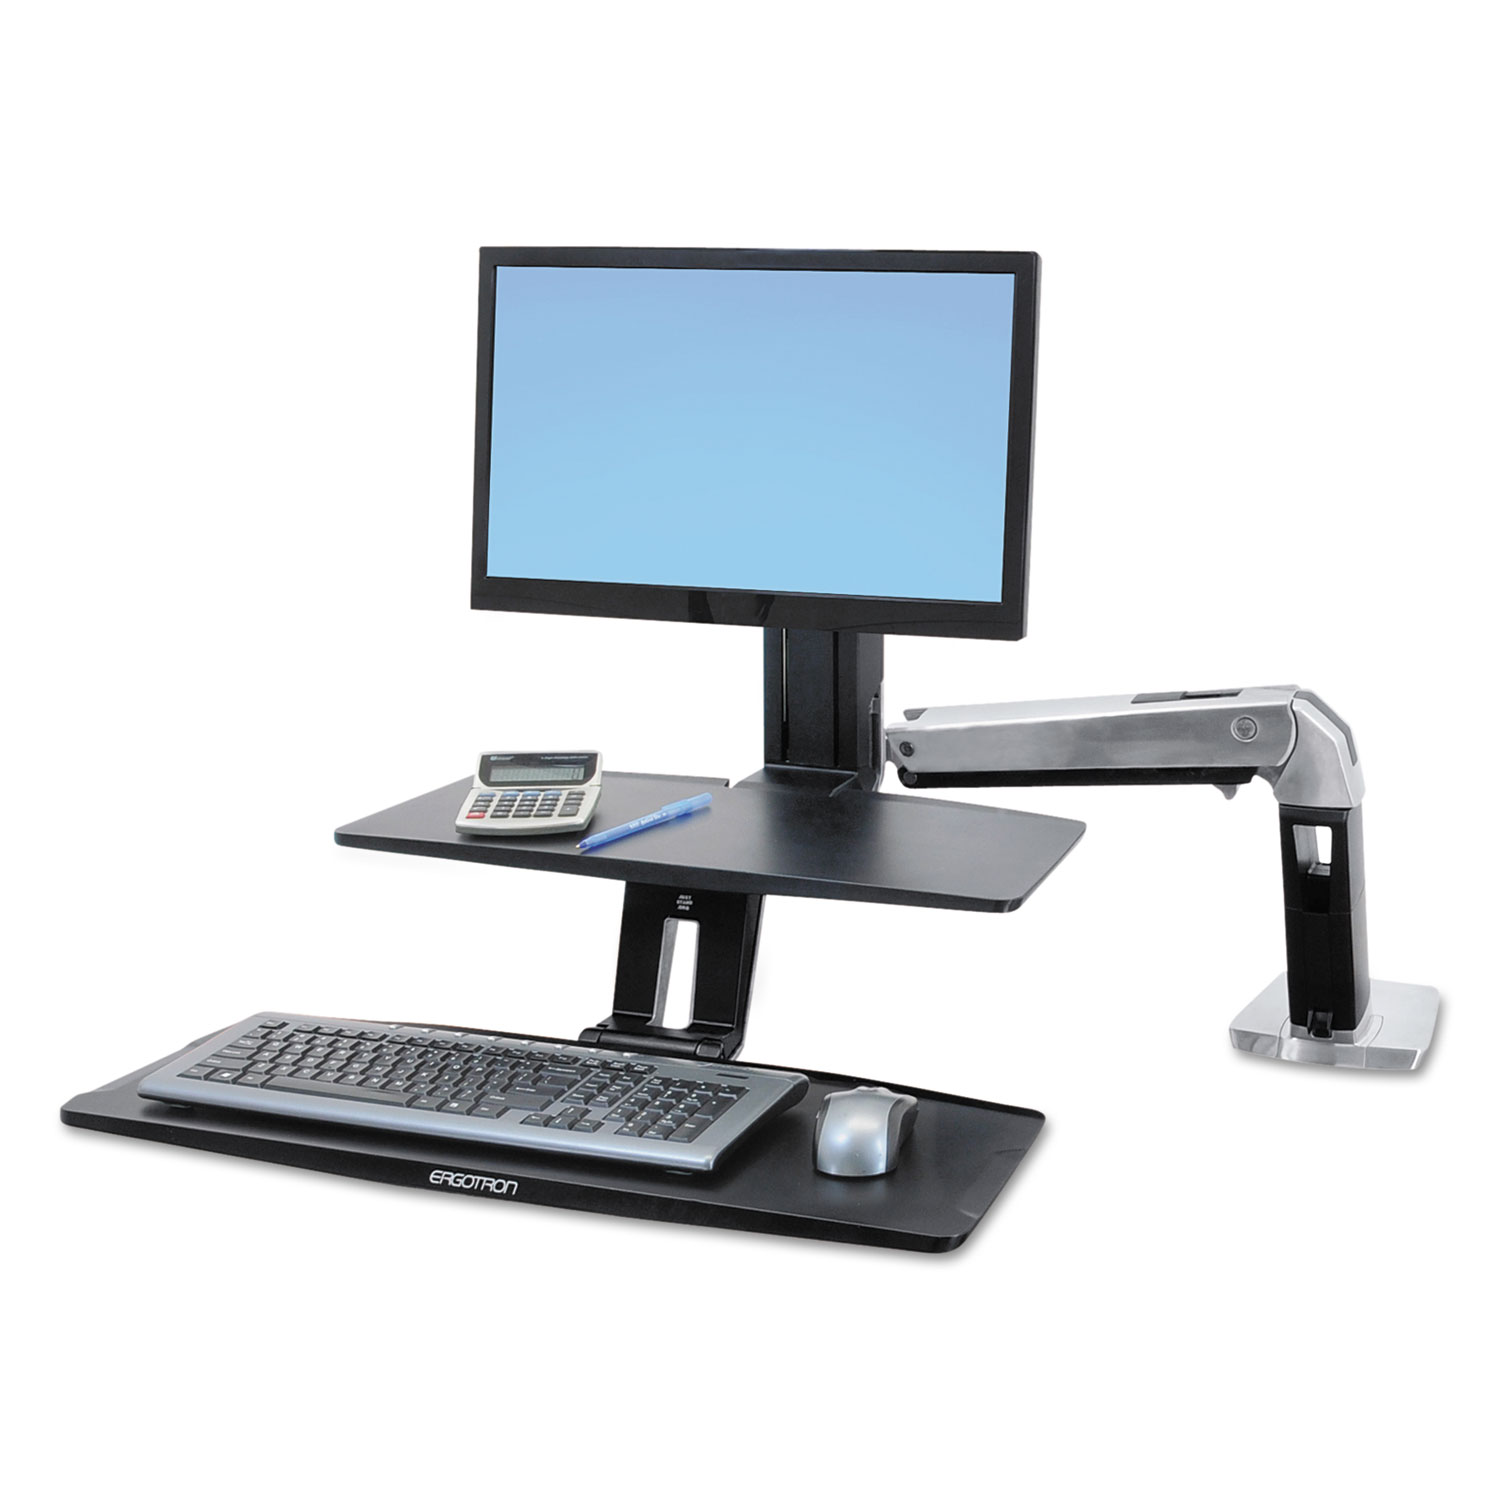  WorkFit by Ergotron 24-390-026 WorkFit-A Sit-Stand Workstation with Suspended Keyboard, Single LD, 21.5w x 11d x 37h, Aluminum/Black (ERG24390026) 